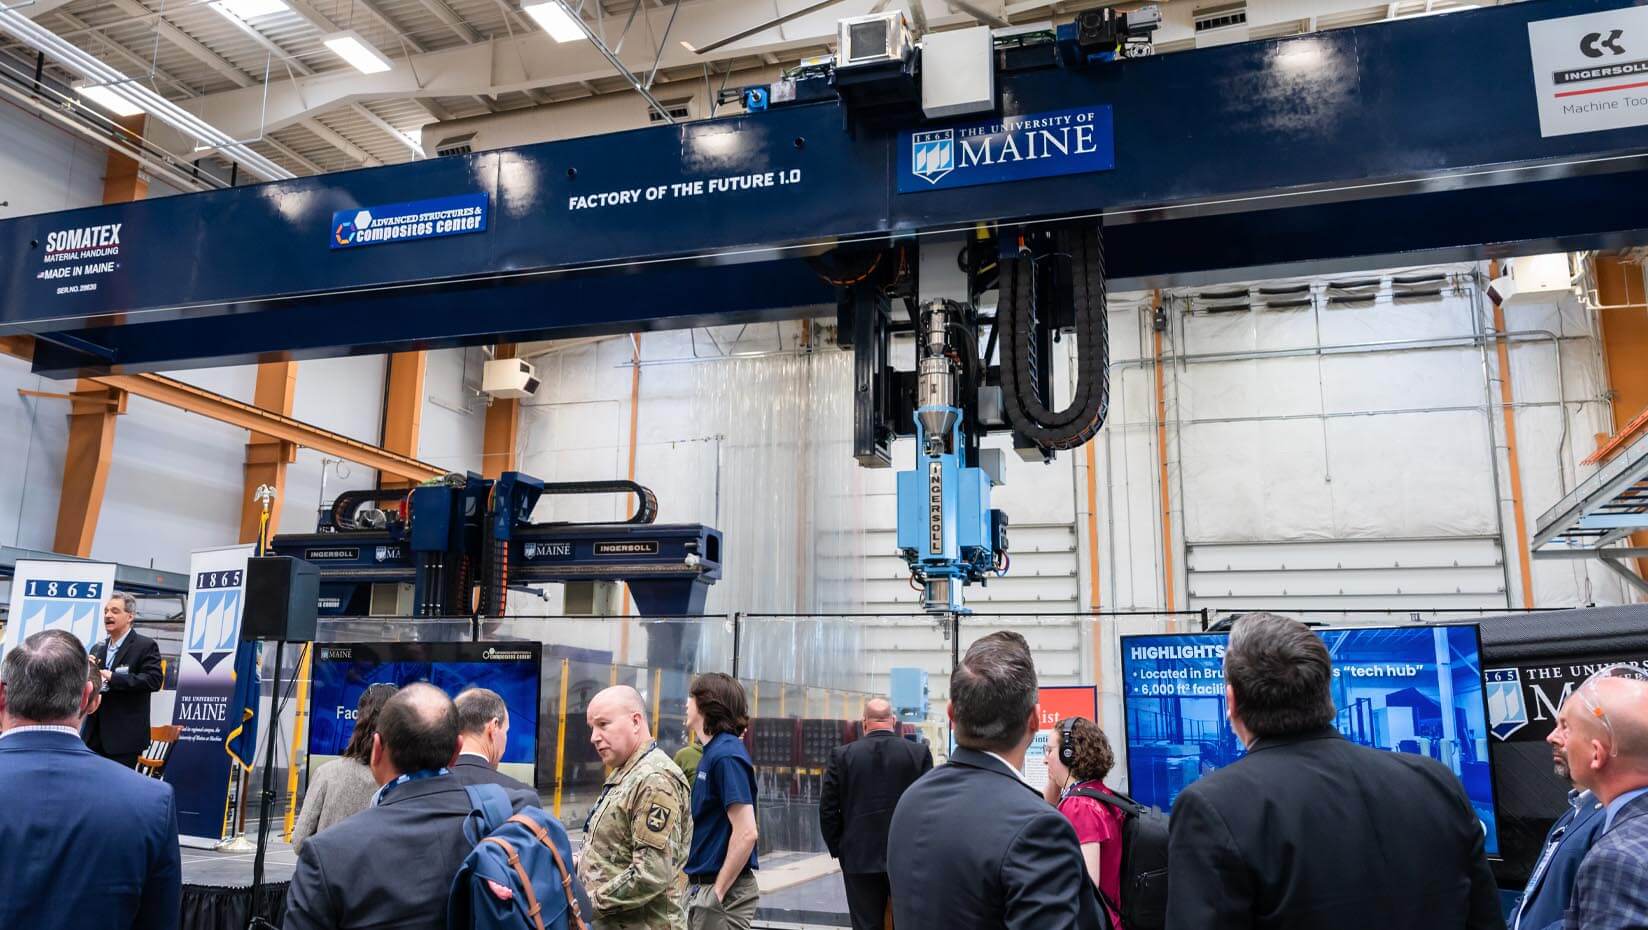 Surpassing its own 2019 Guinness World Record for the largest polymer 3D printer, UMaine unveiled a next-generation printer that is four times larger 